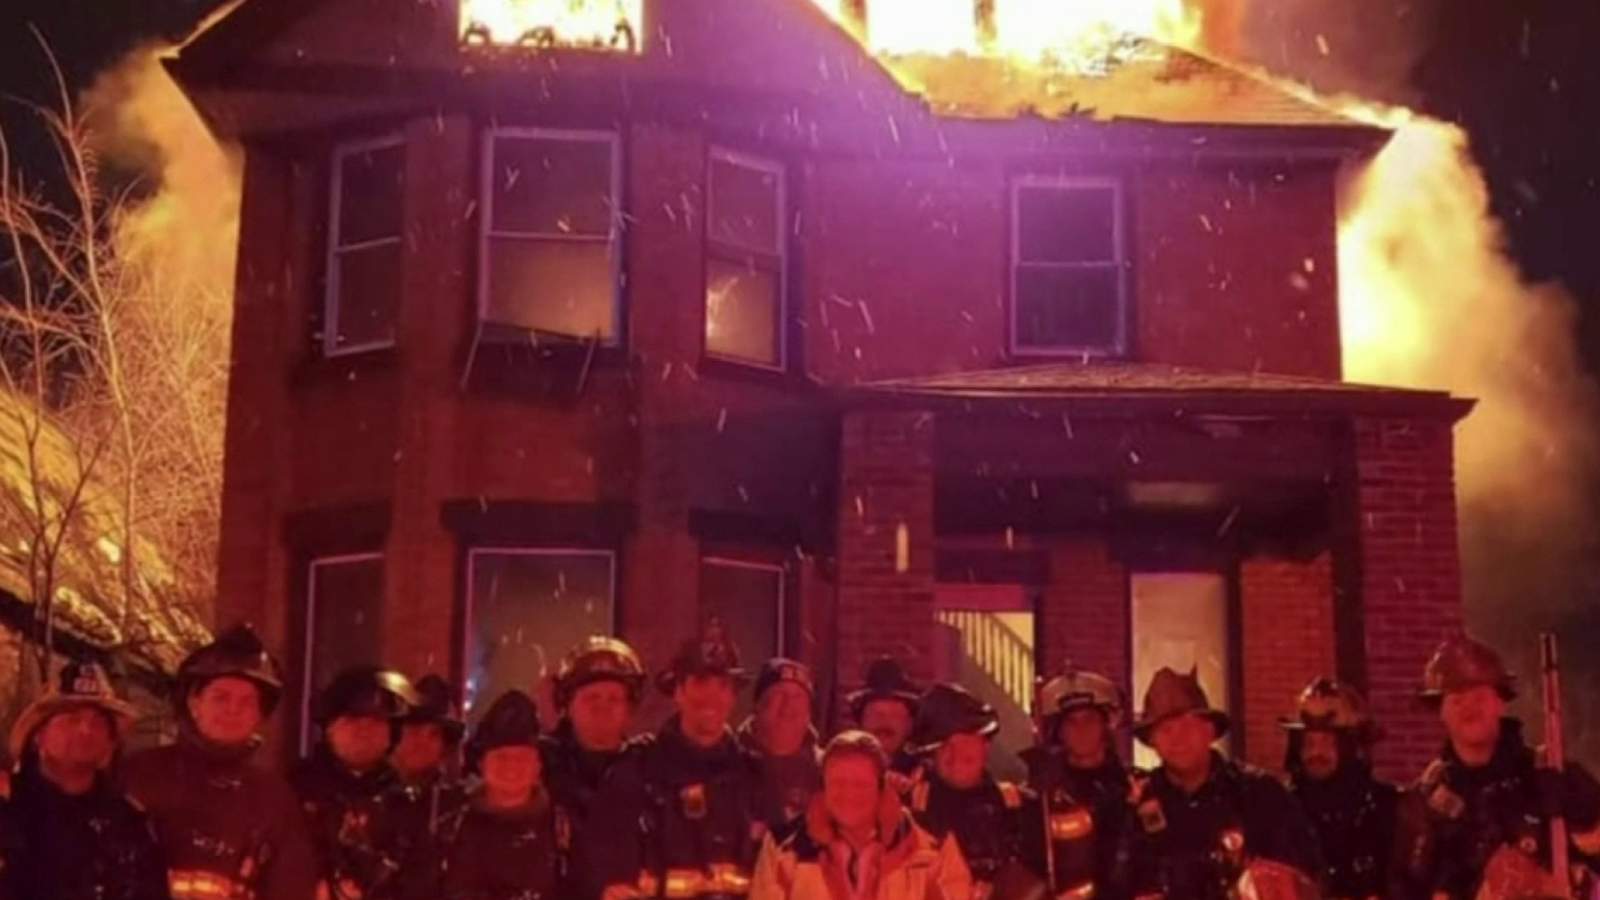 Fire commissioner: Detroit firefighters who posed in front of burning house for picture will be ‘held accountable’